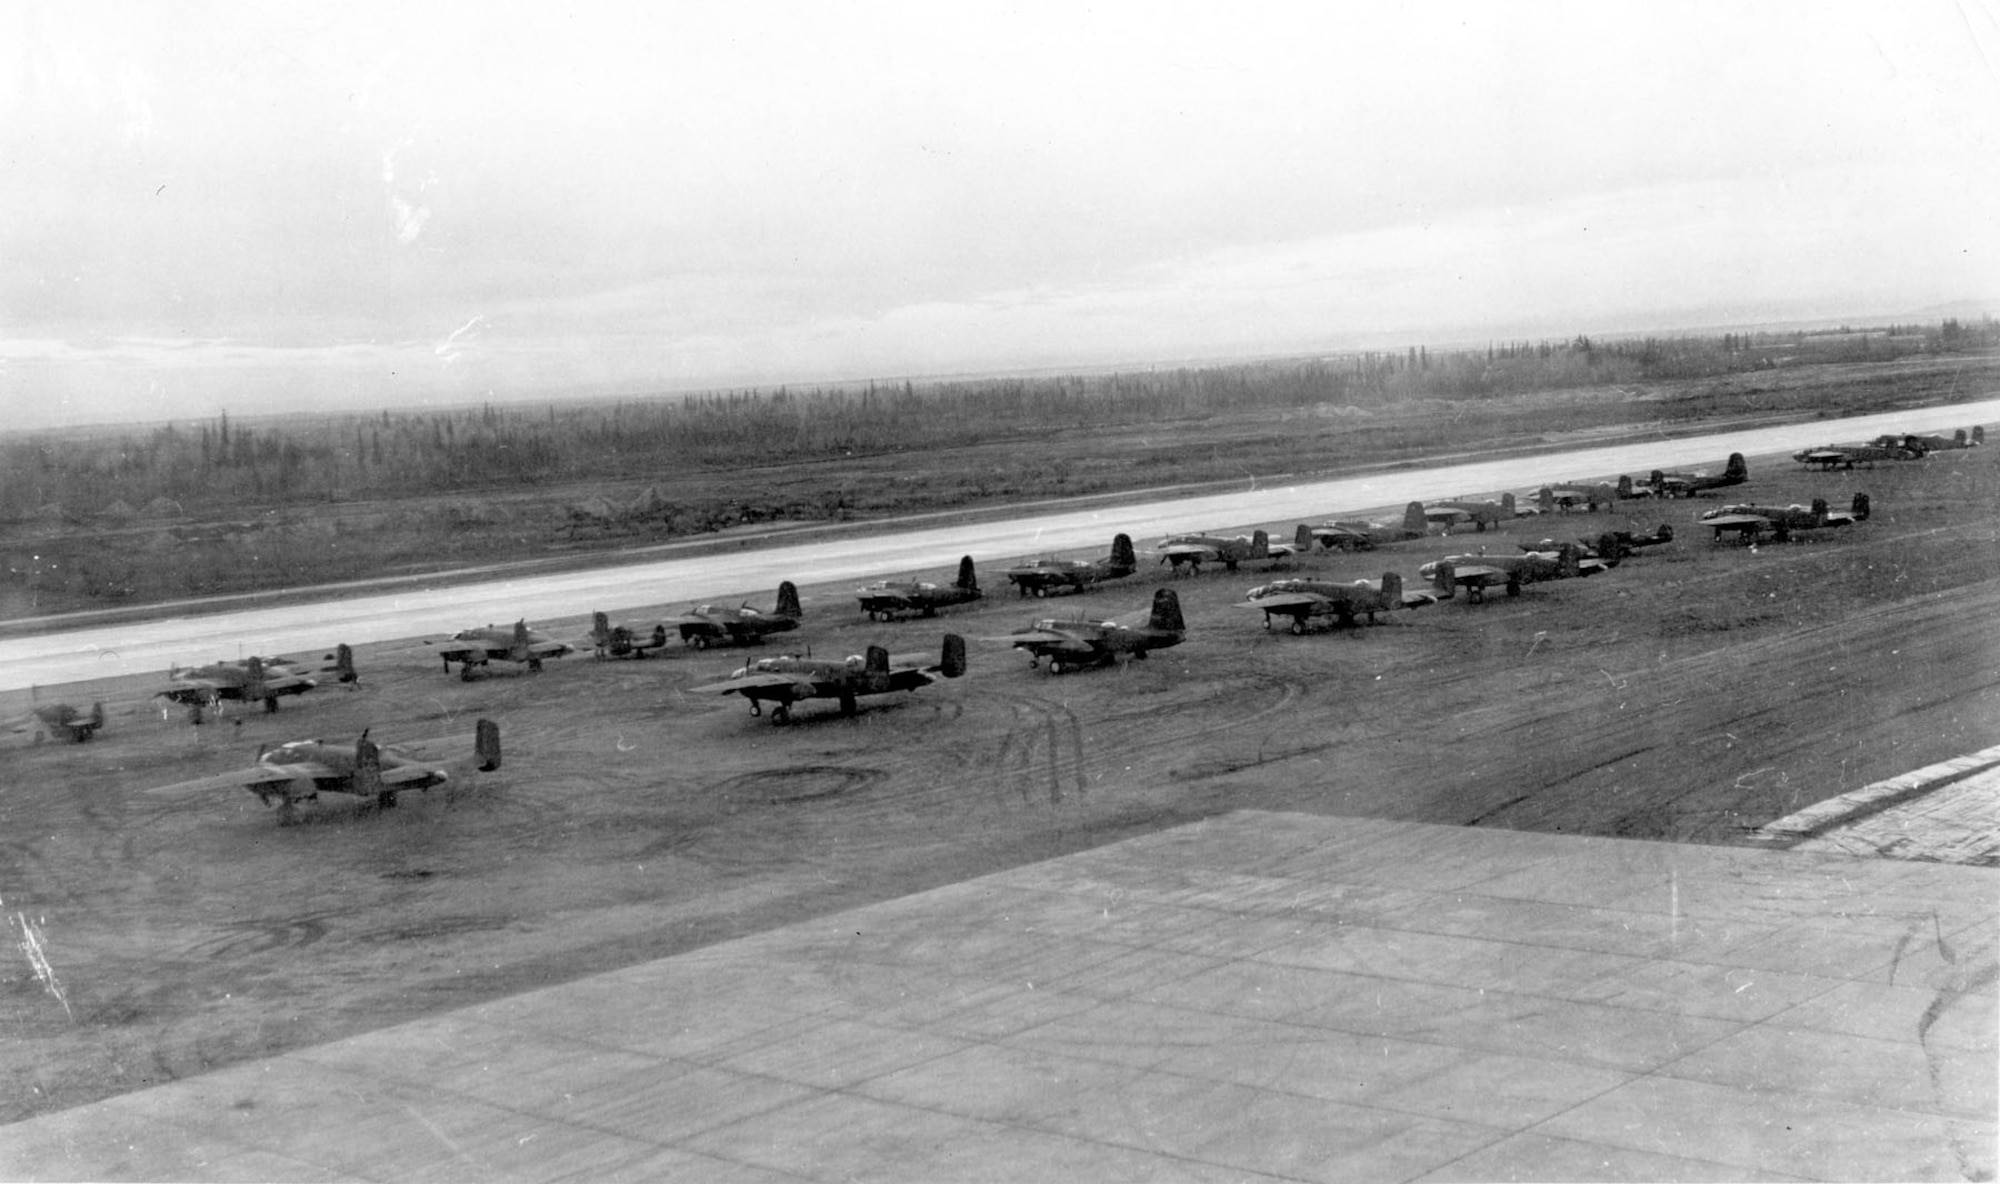 Lend-lease B-25s and P-39s on the runway at Ladd Field, Alaska, prior to testing by the Soviet Purchasing Commission, September 1942. (U.S. Air Force photo)